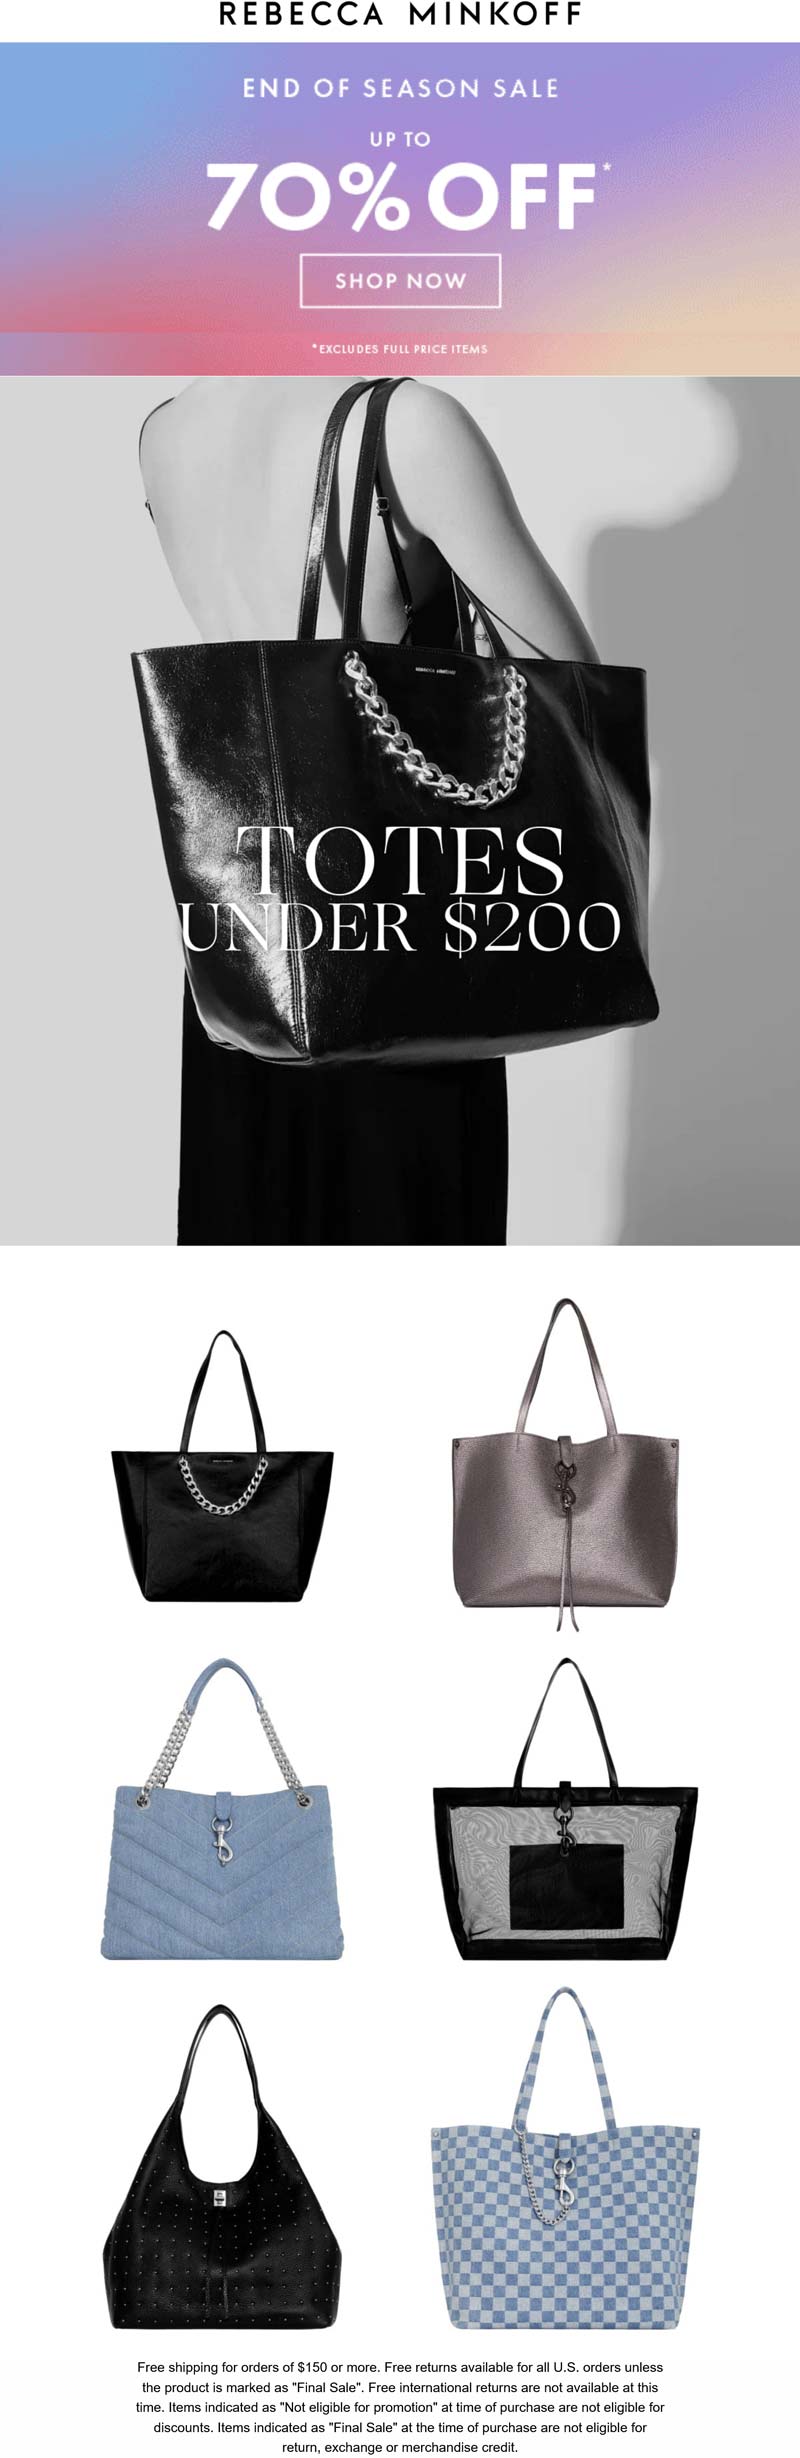 Rebecca Minkoff stores Coupon  Totes under $200 at Rebecca Minkoff #rebeccaminkoff 